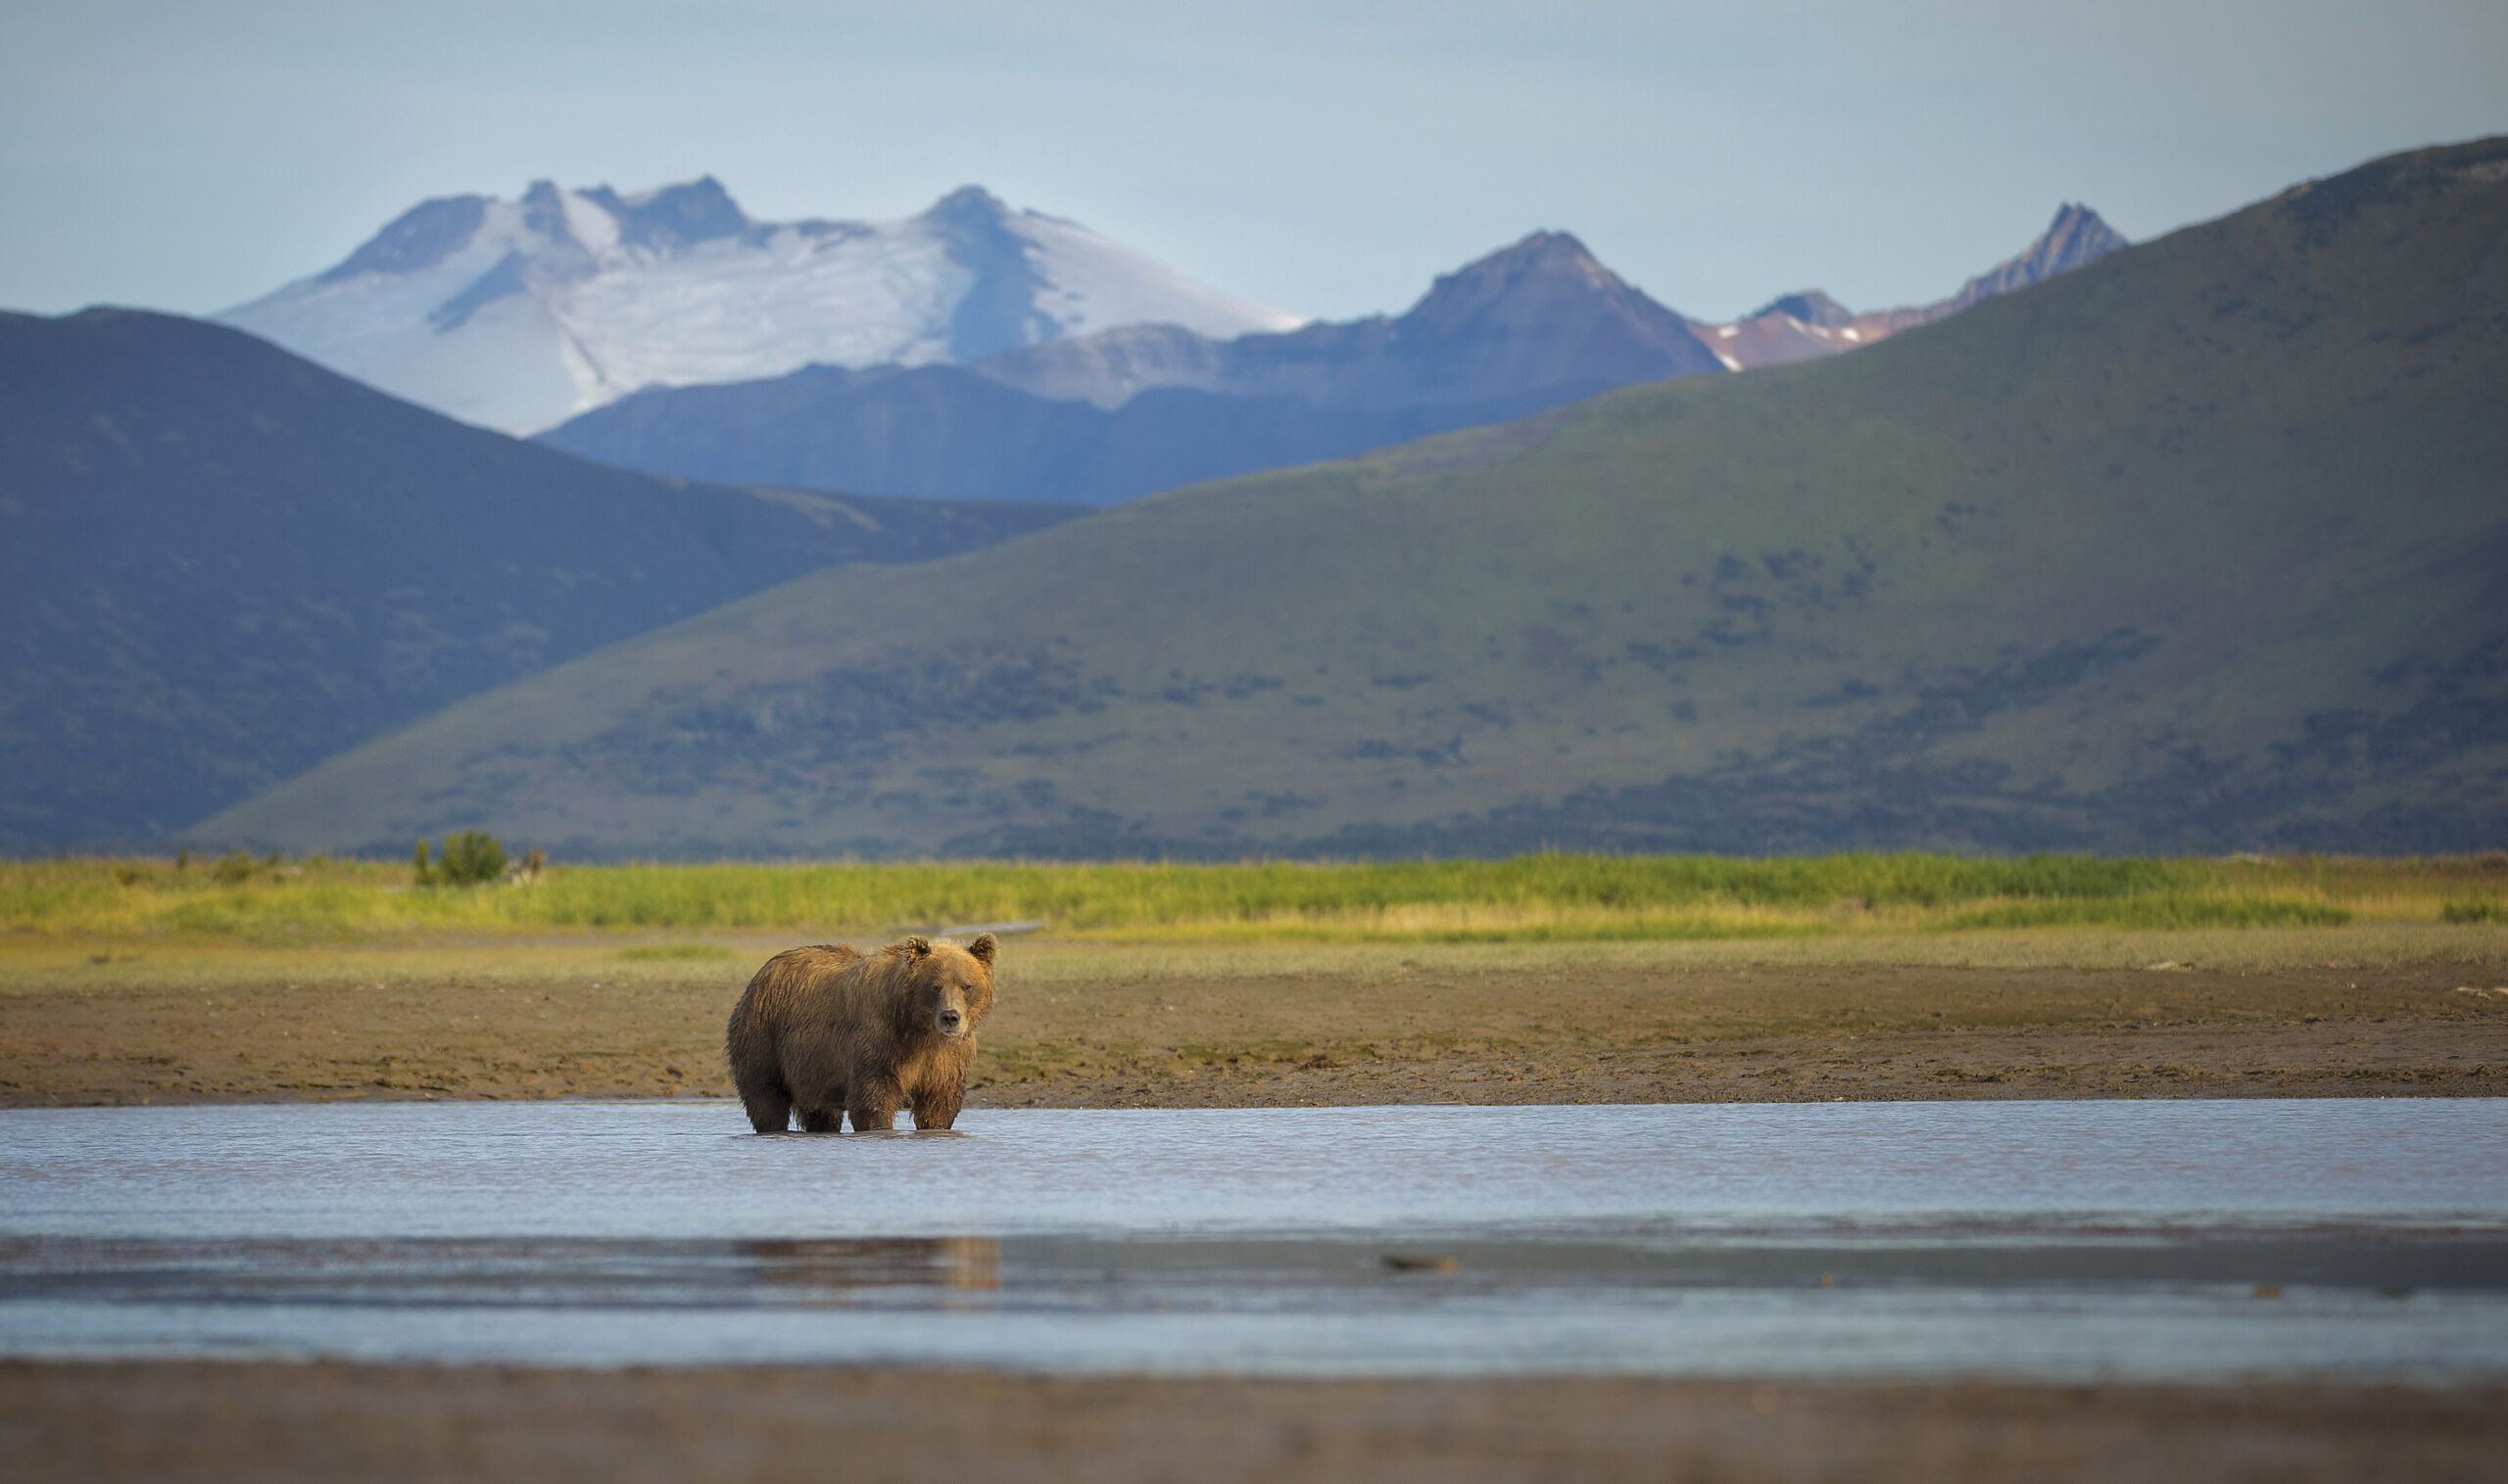 Brown bear wading in stream with mountains in background